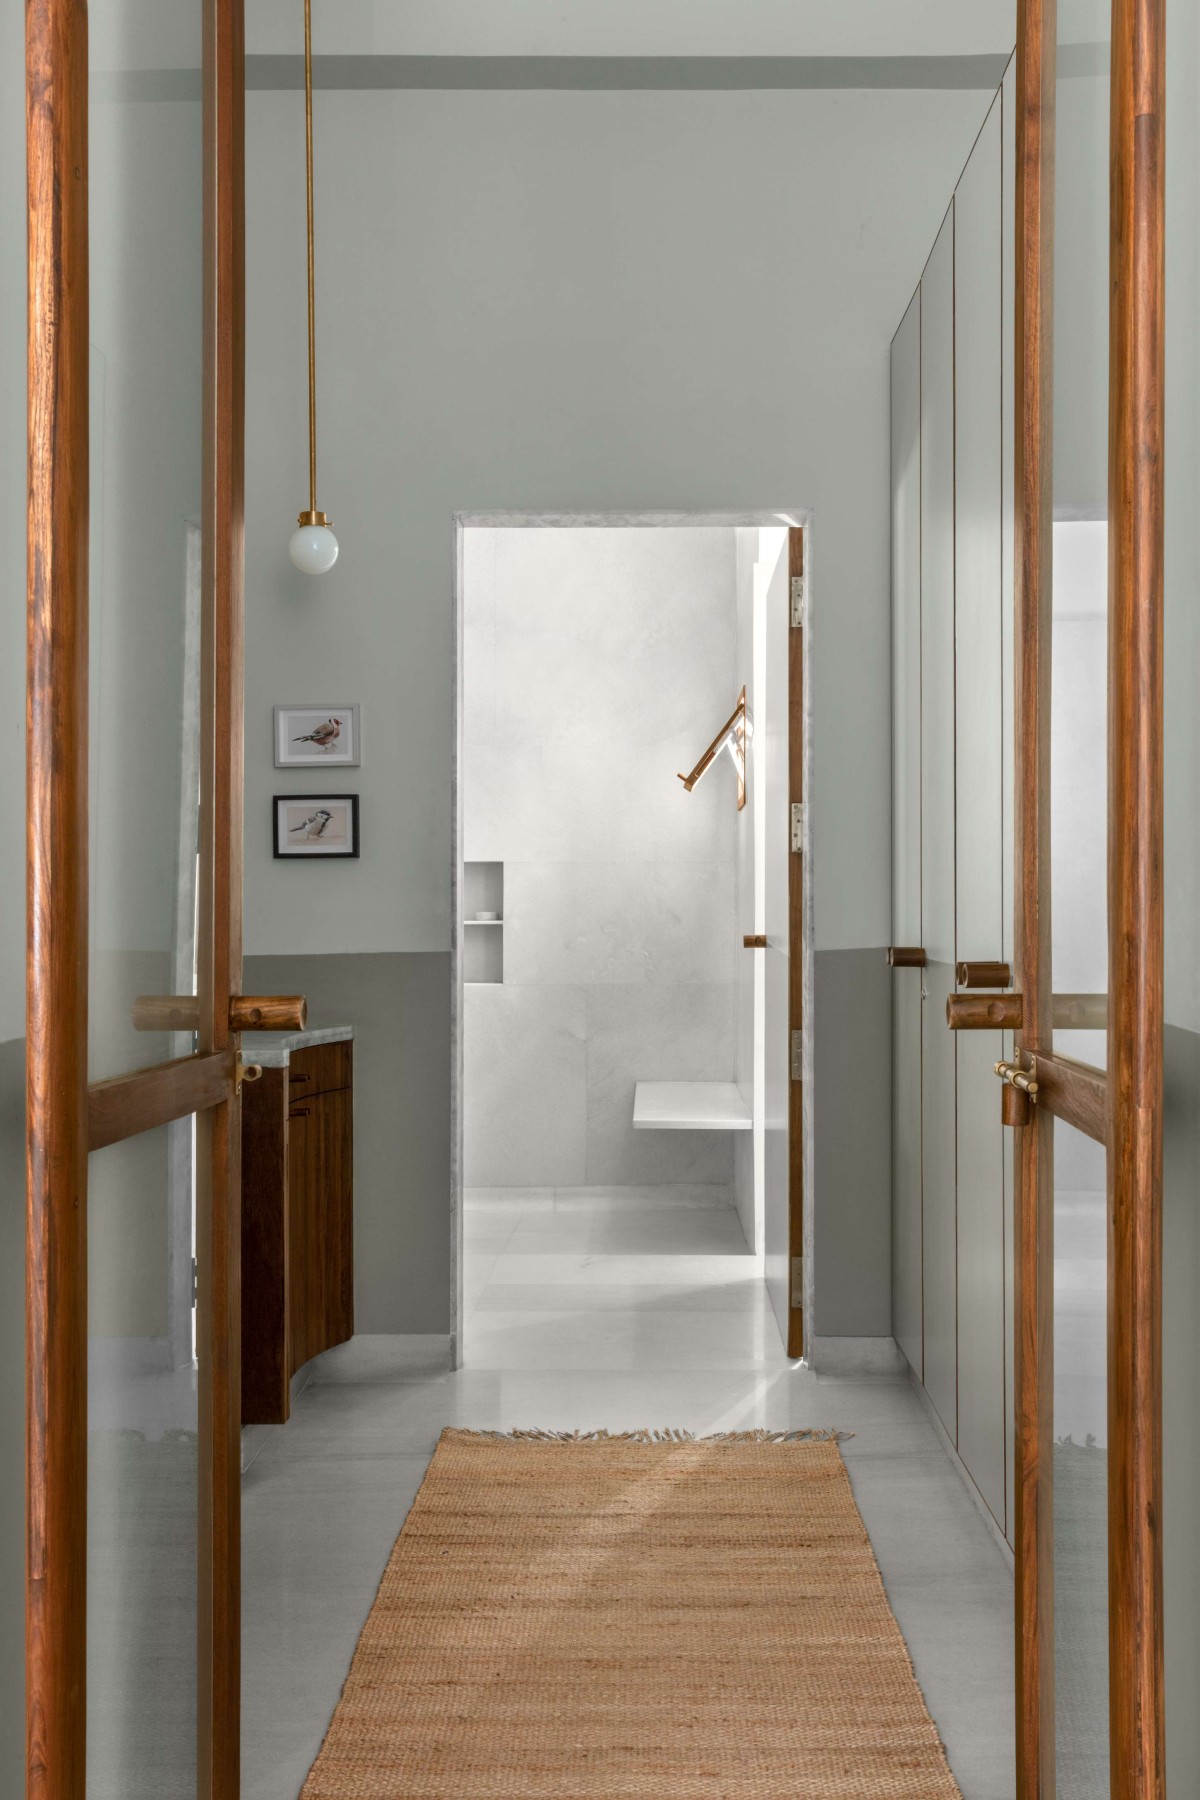 Dresser Toilet of The Courtyard House by Atelier Varun Goyal